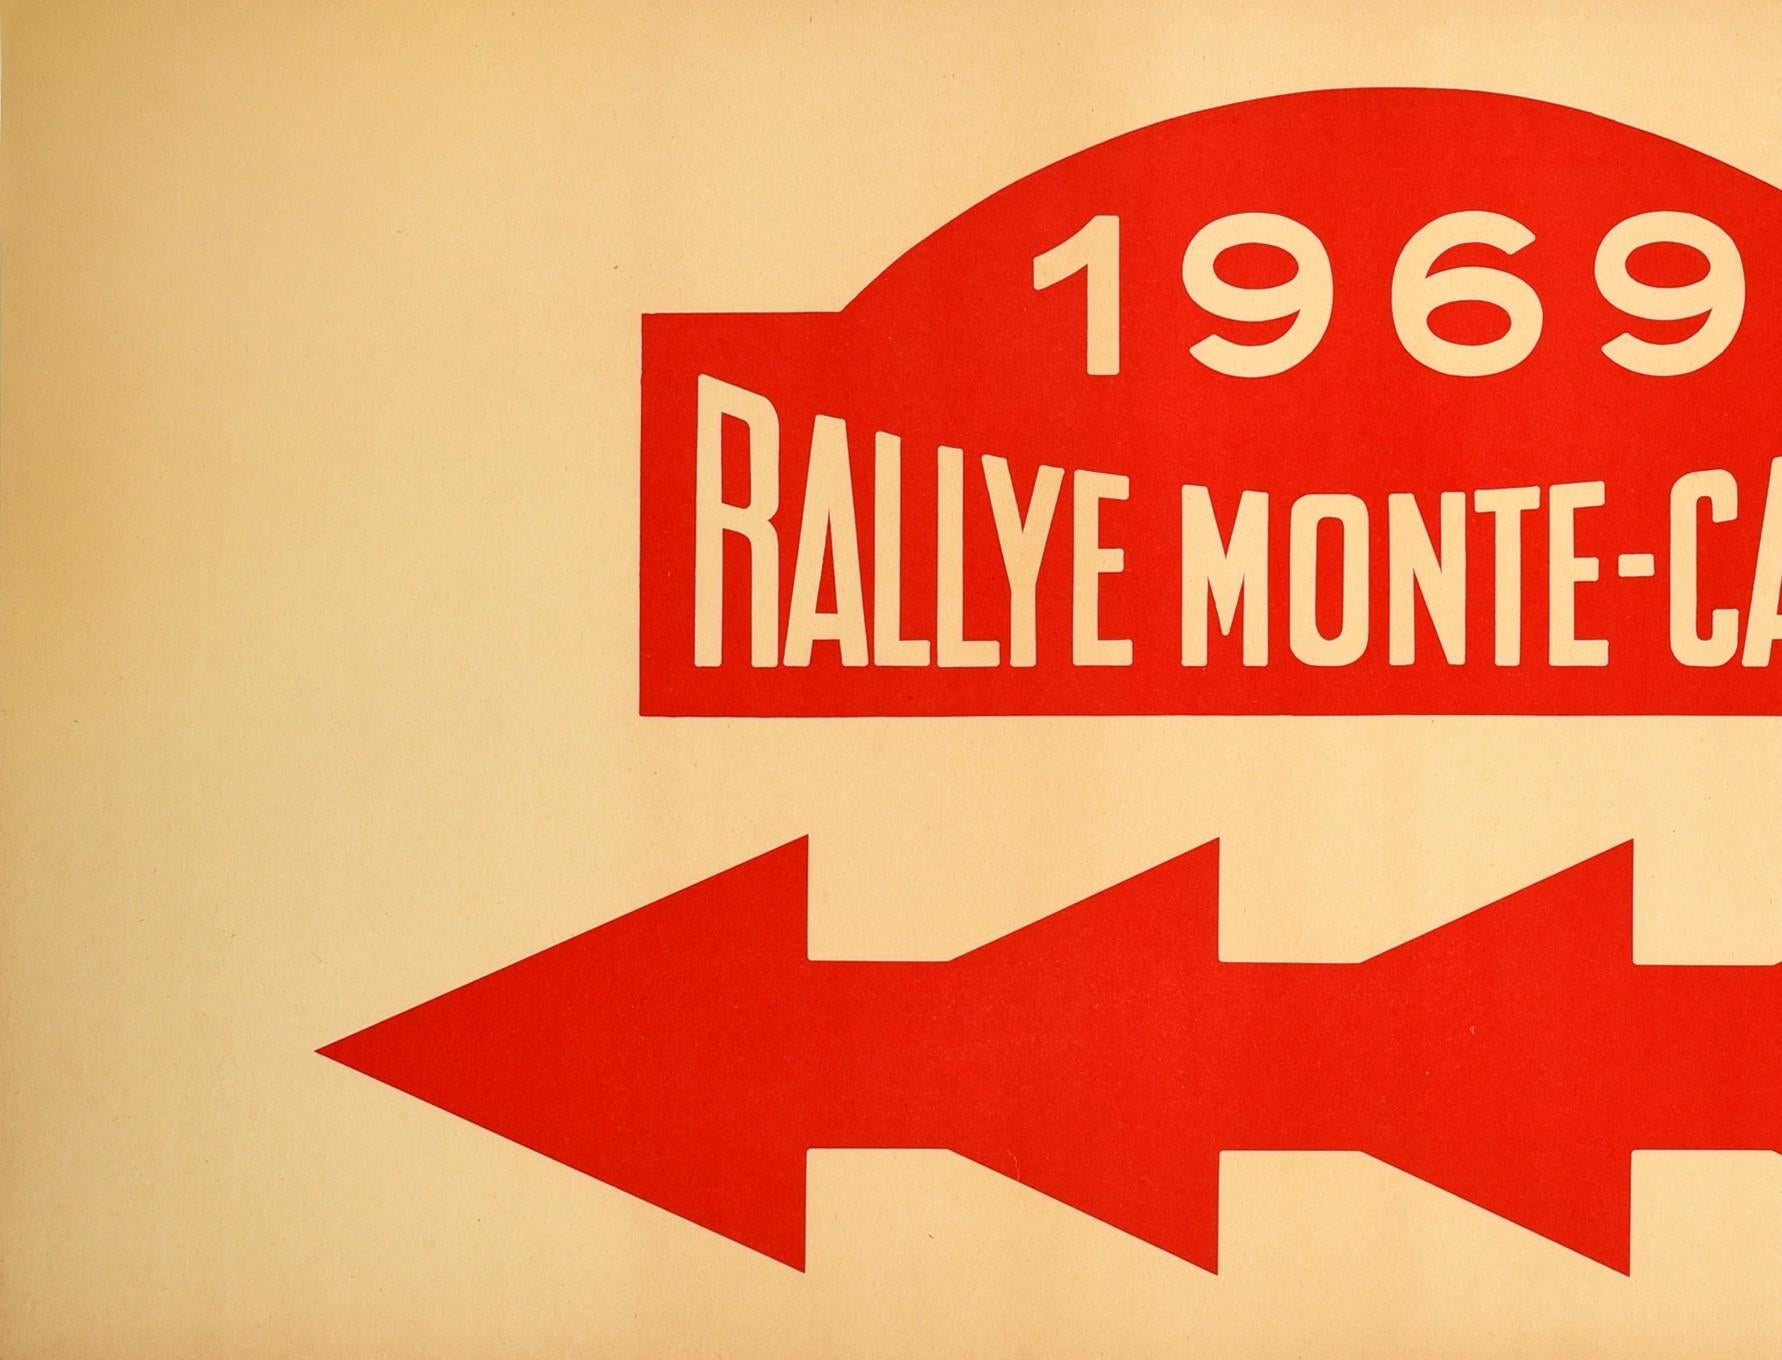 Original vintage motor sport poster for the 1969 Rallye Monte-Carlo featuring iconic logo with the stylised lettering against the red background above a bold red line with four arrows pointing left. Held since 1911, the annual Monte Carlo Rally /